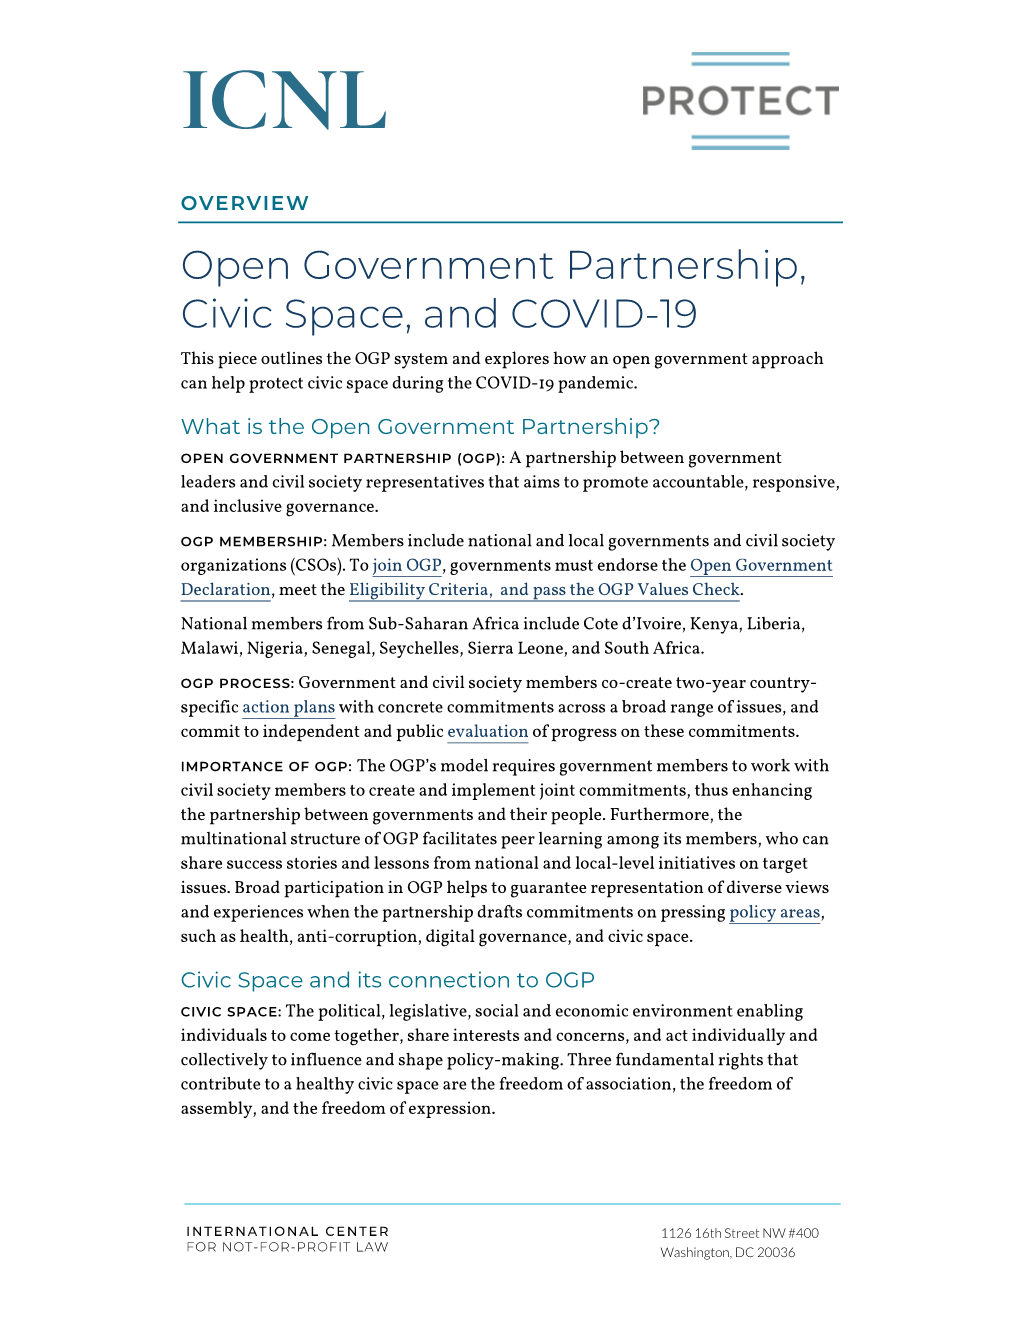 Open Government Partnership, Civic Space, and COVID-19